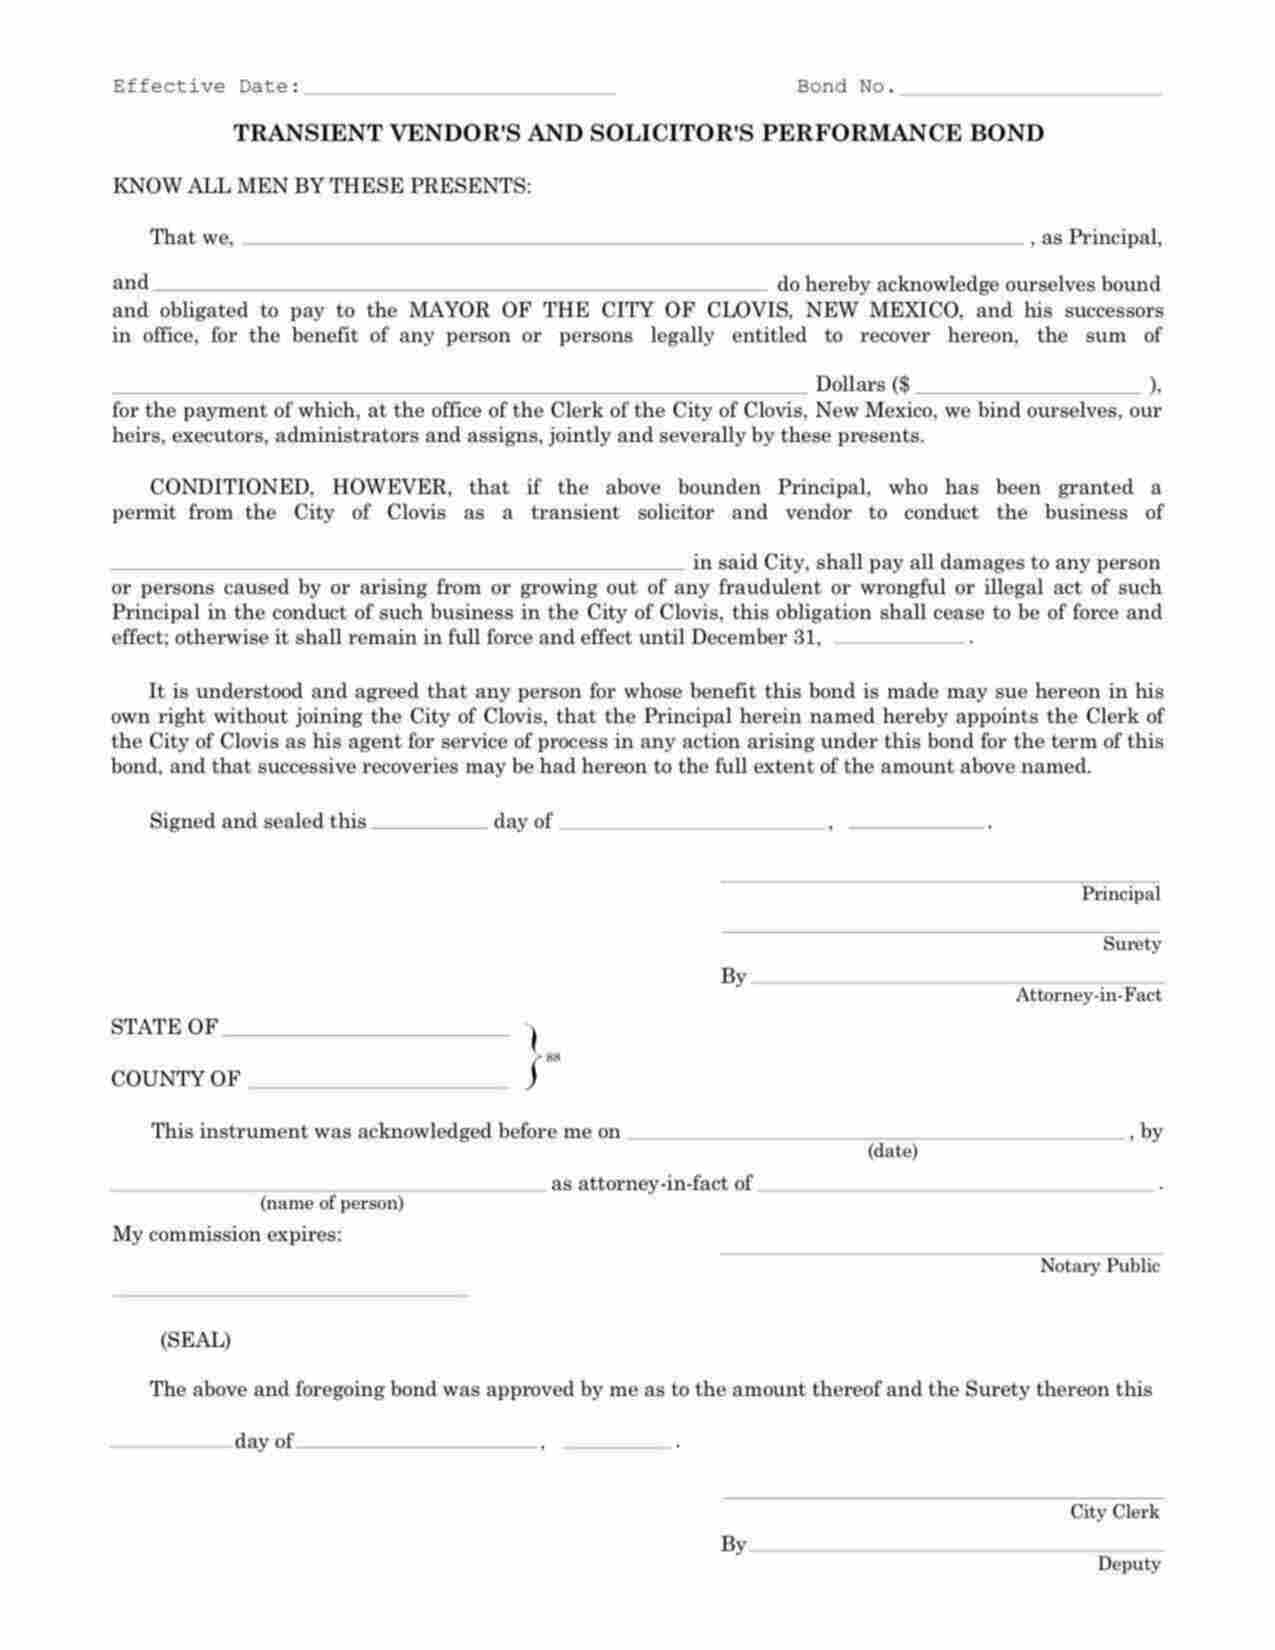 New Mexico Transient Vendor's and Solicitor's Performance Bond Form